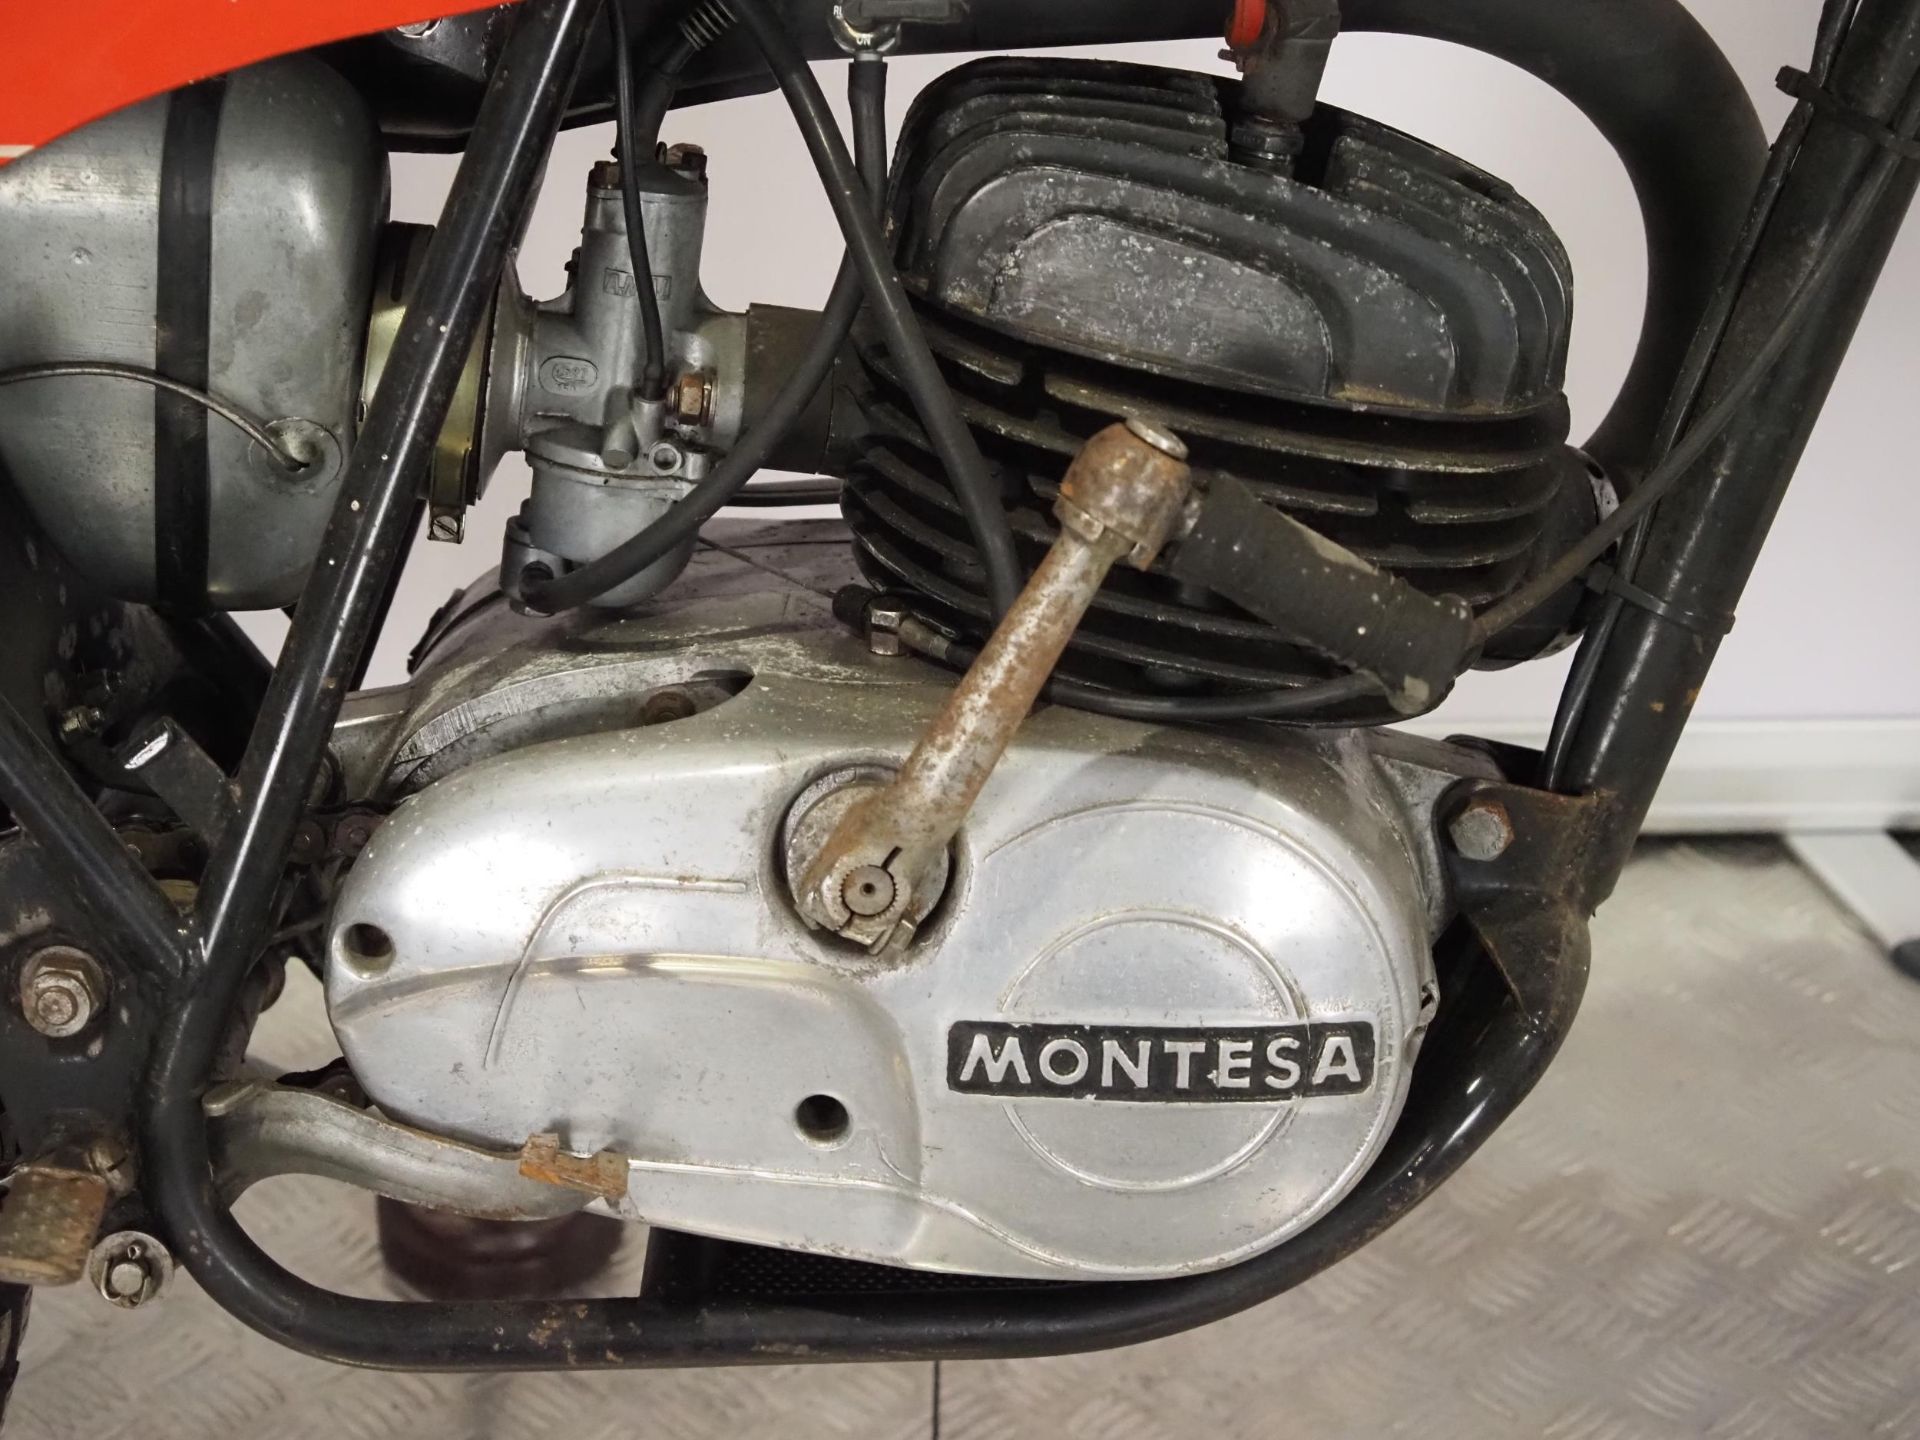 Montesa Cota 247 trials motorcycle. 1971. 247cc Engine No. 21M25917 Engine turns over. Has been - Image 4 of 6